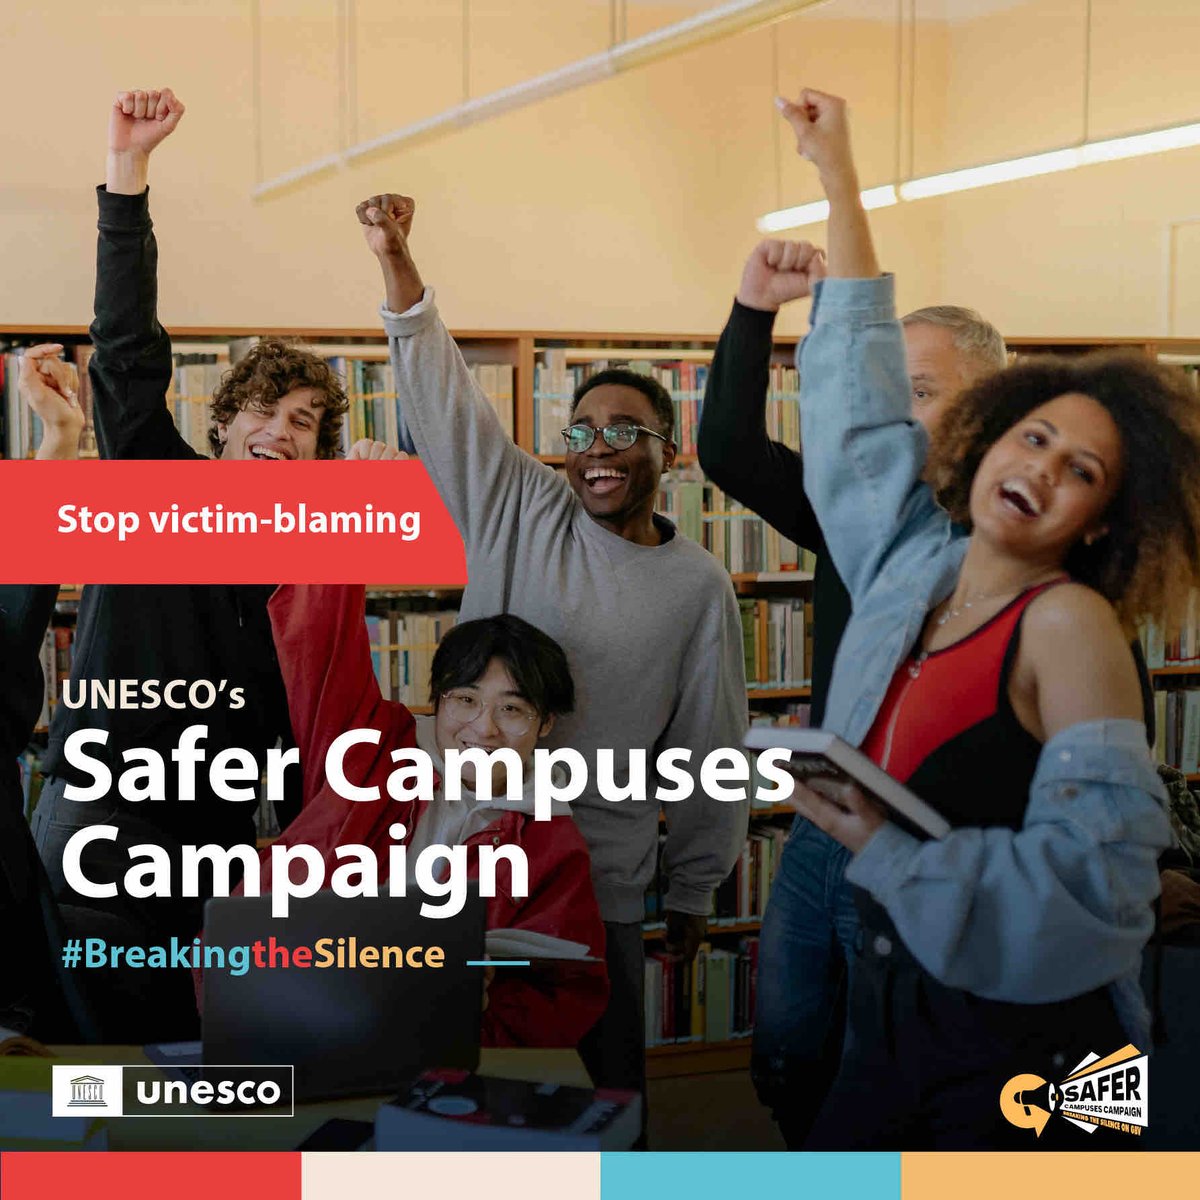 The #SaferCampusesCampaign is challenging harmful gender norms that fuel gender-based violence (GBV) on campuses. Join the movement to break down these norms and foster a campus culture that promotes respect and safety for all. #UNESCO #BreakingTheSilence